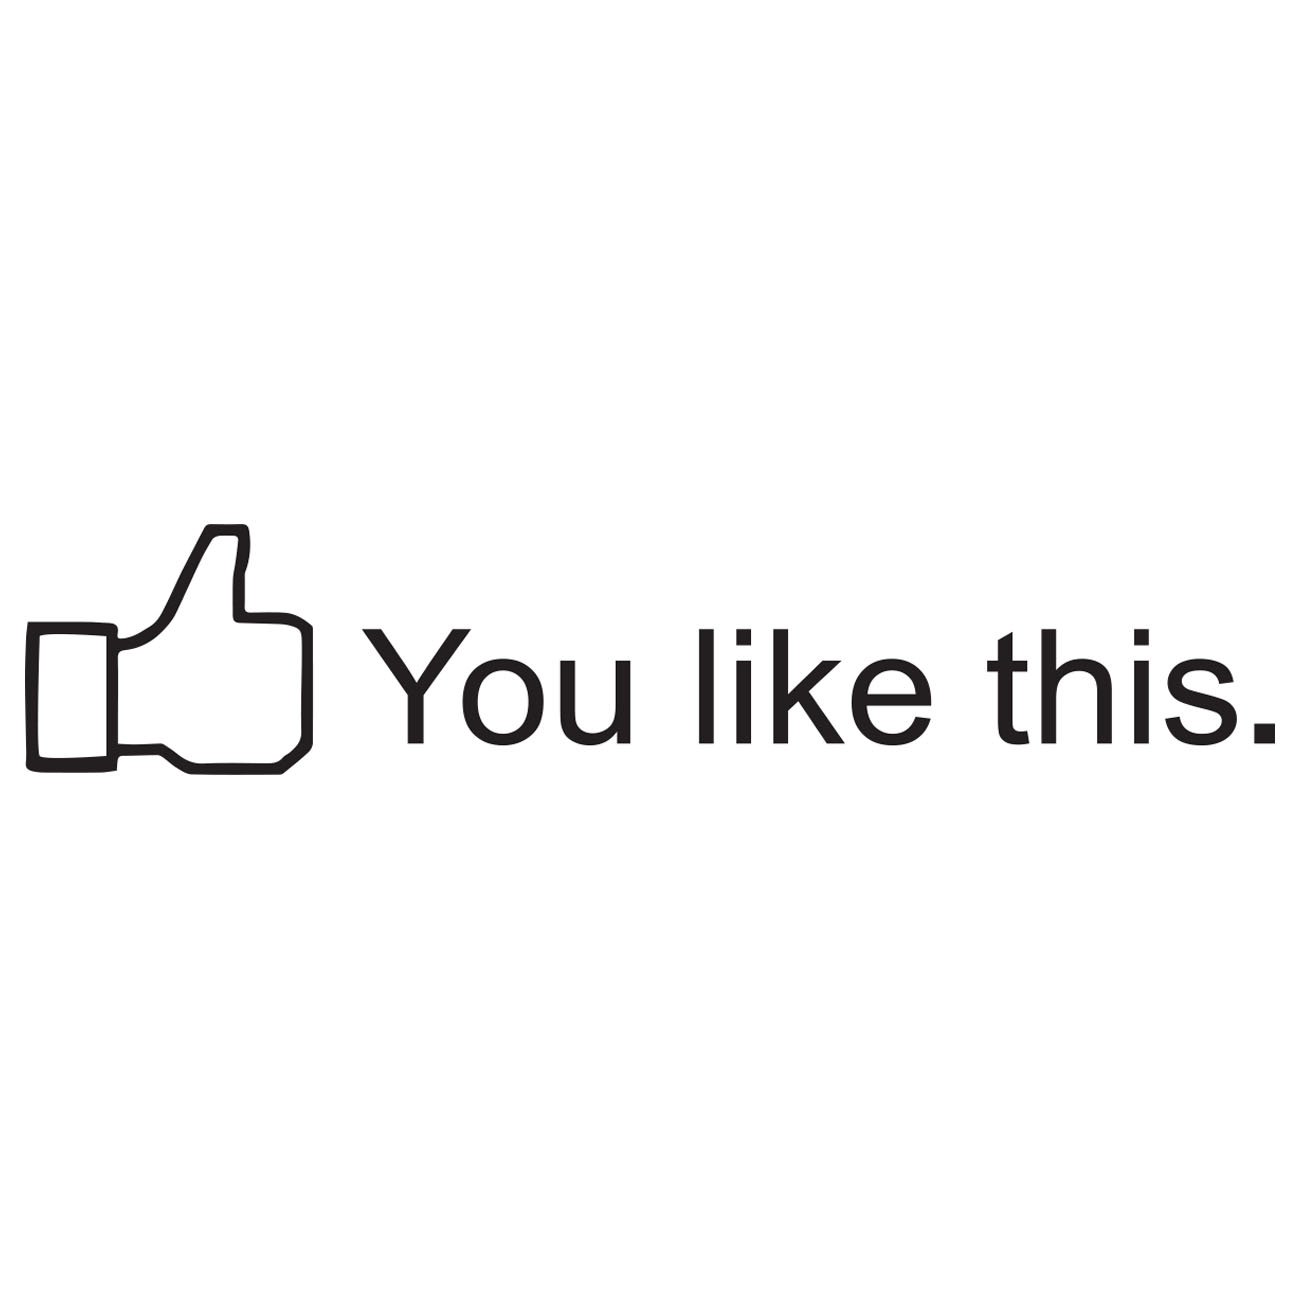 You like this - Facebook hand